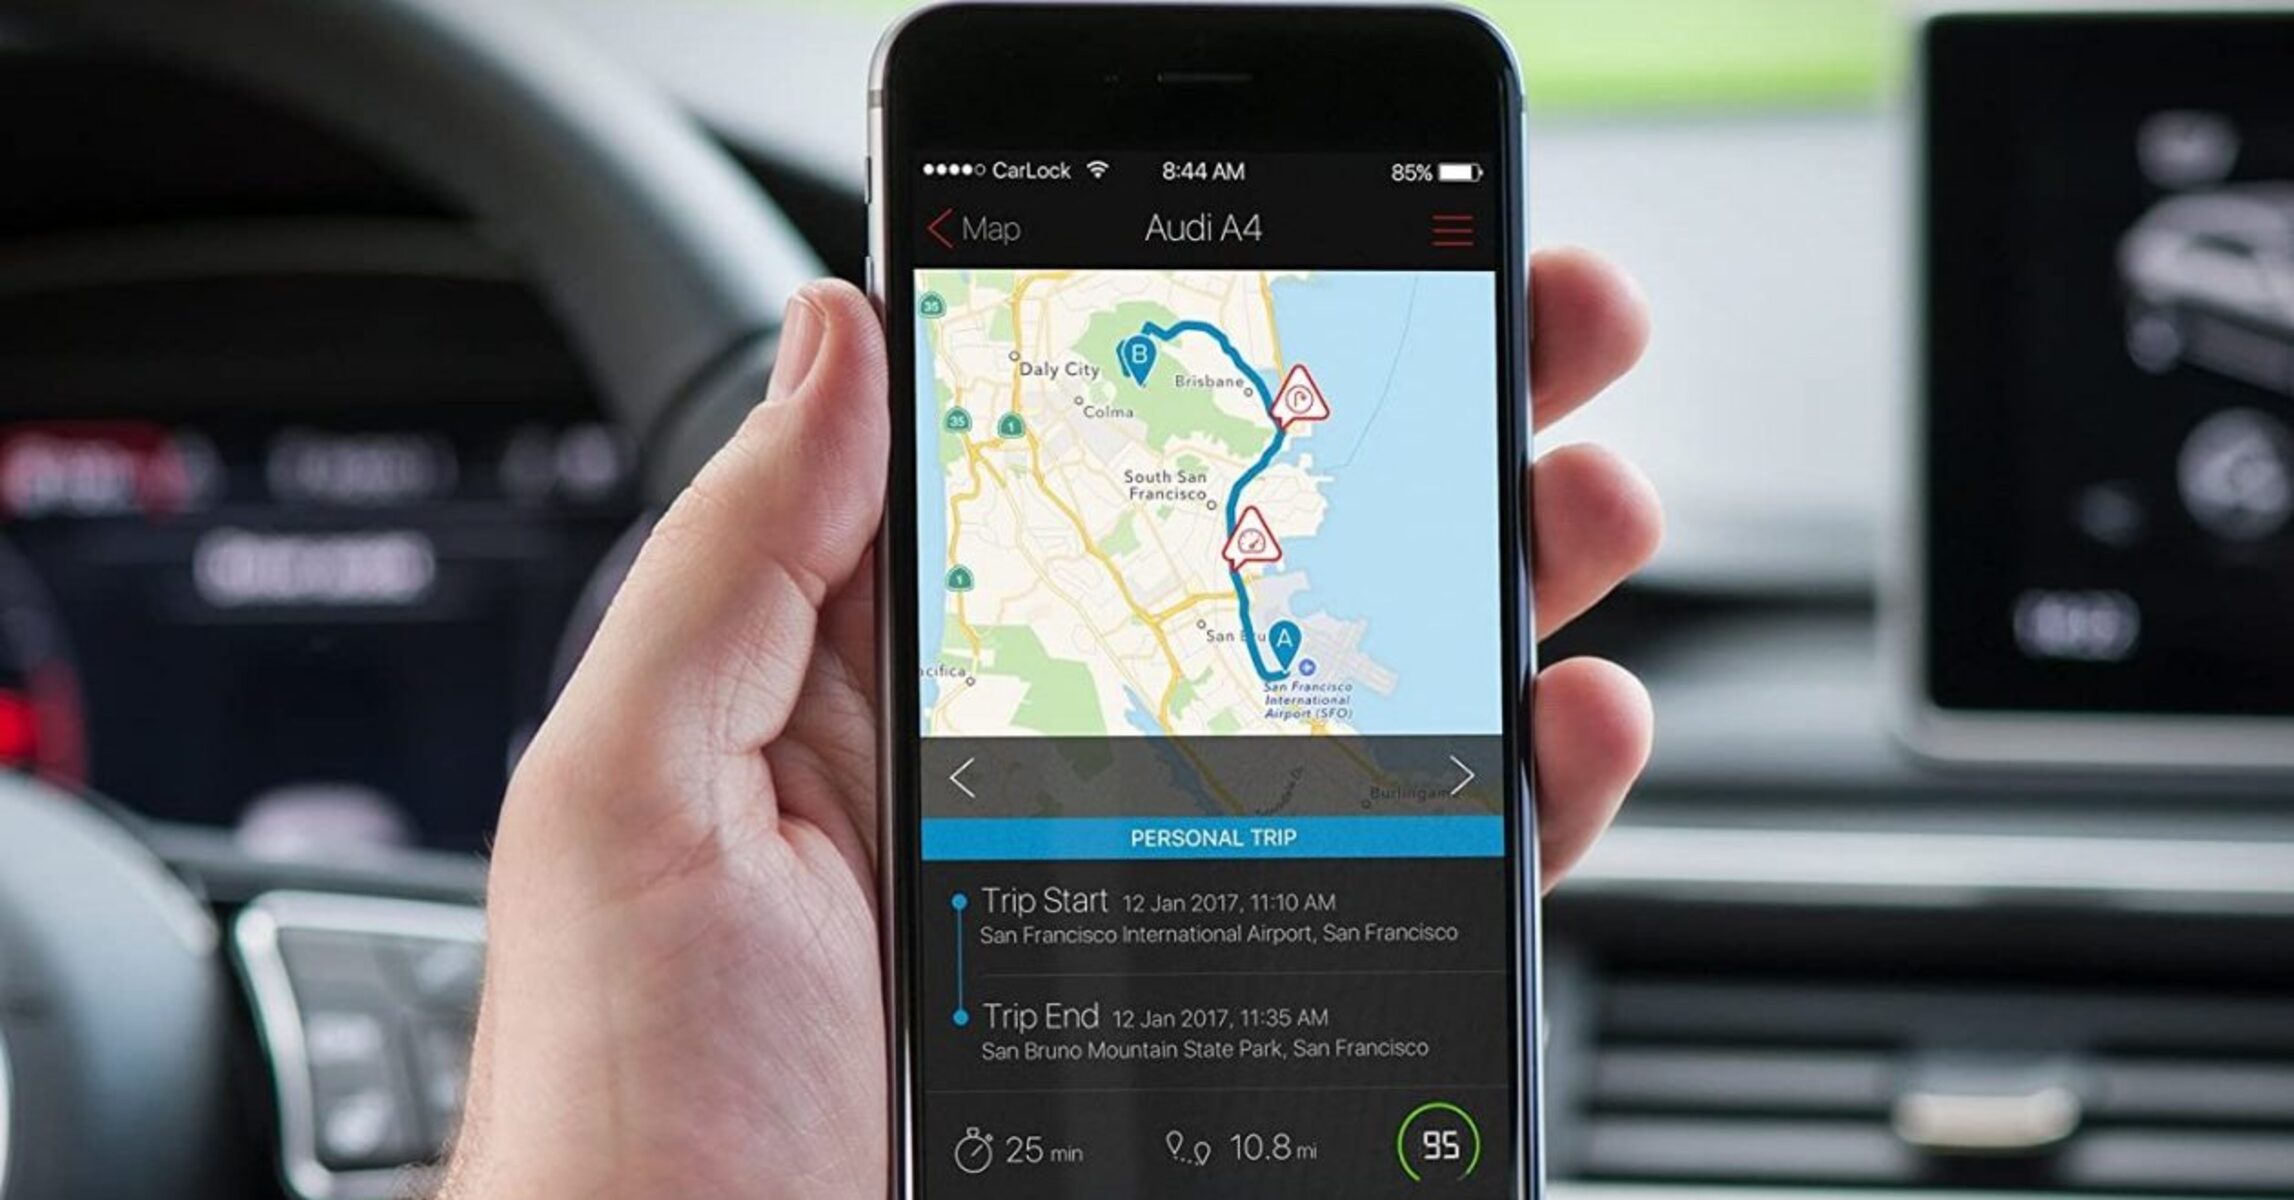 installation-guide-how-to-set-up-your-gps-tracker